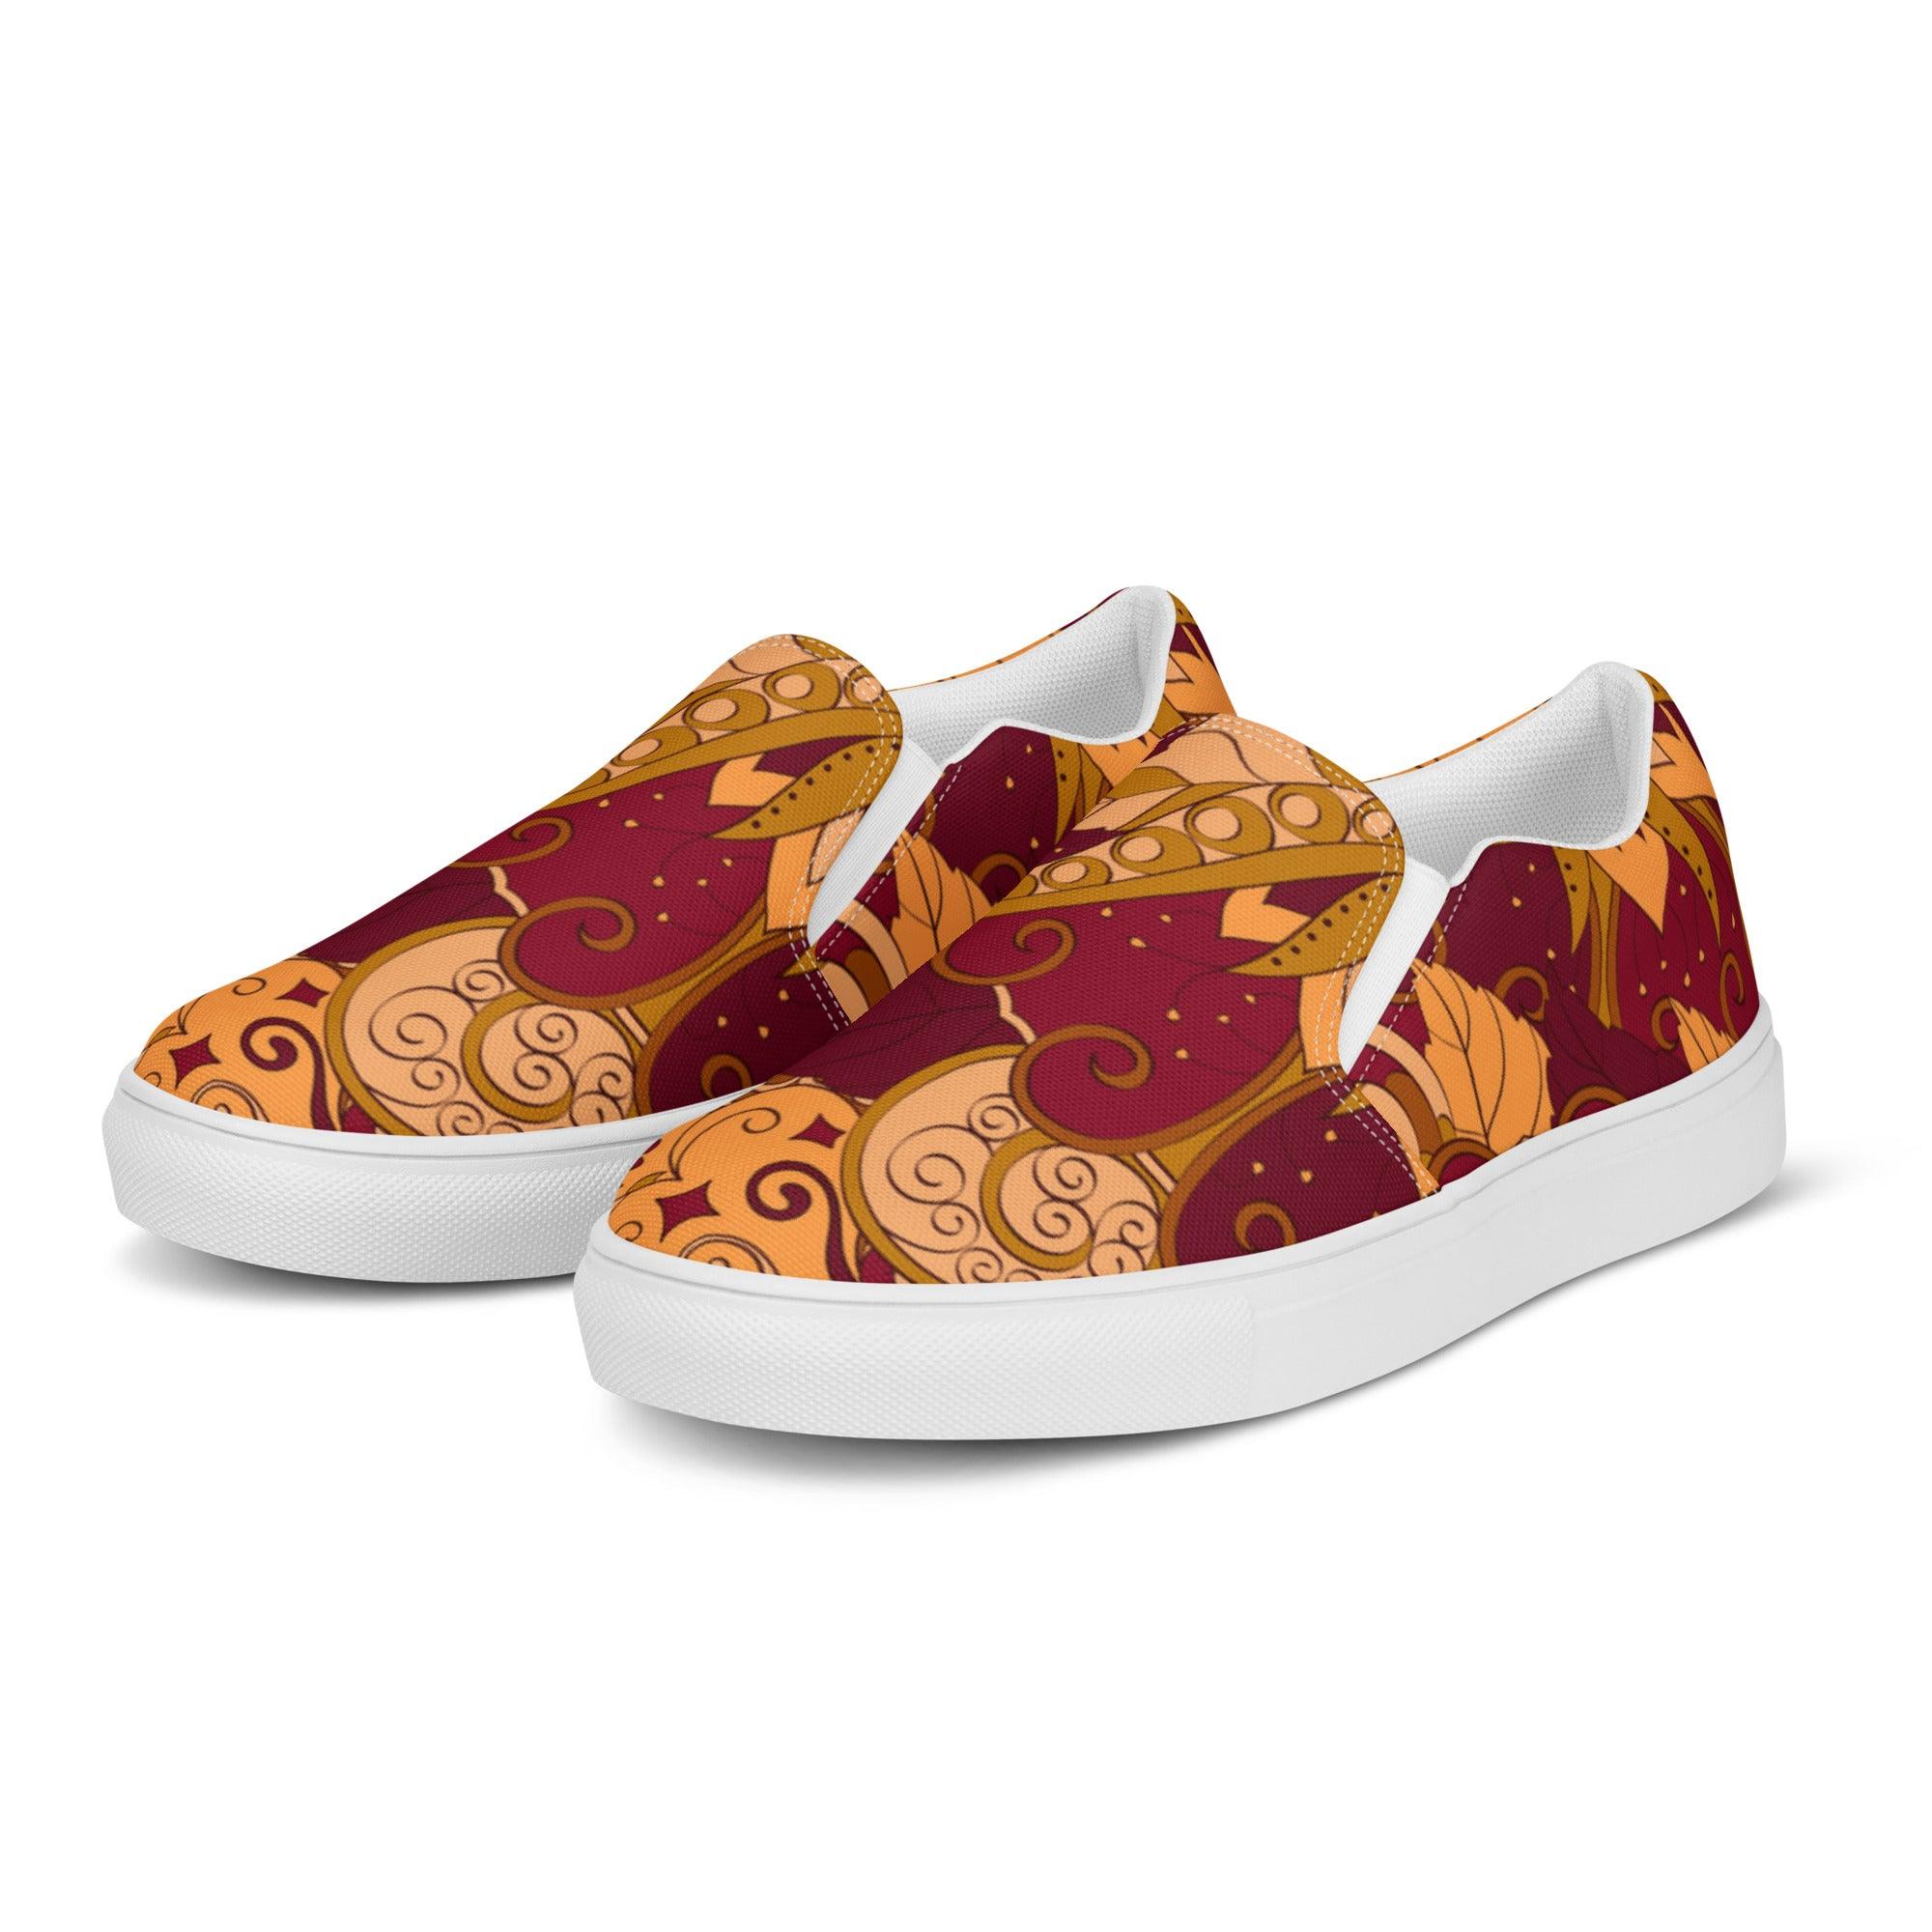 Renai Slip On Canvas Women's Sneakers - All Over Abstract Psychedelic Retro Paisley Floral Print -  Flower Power - Bold Vibrant Womens Shoes - Boho